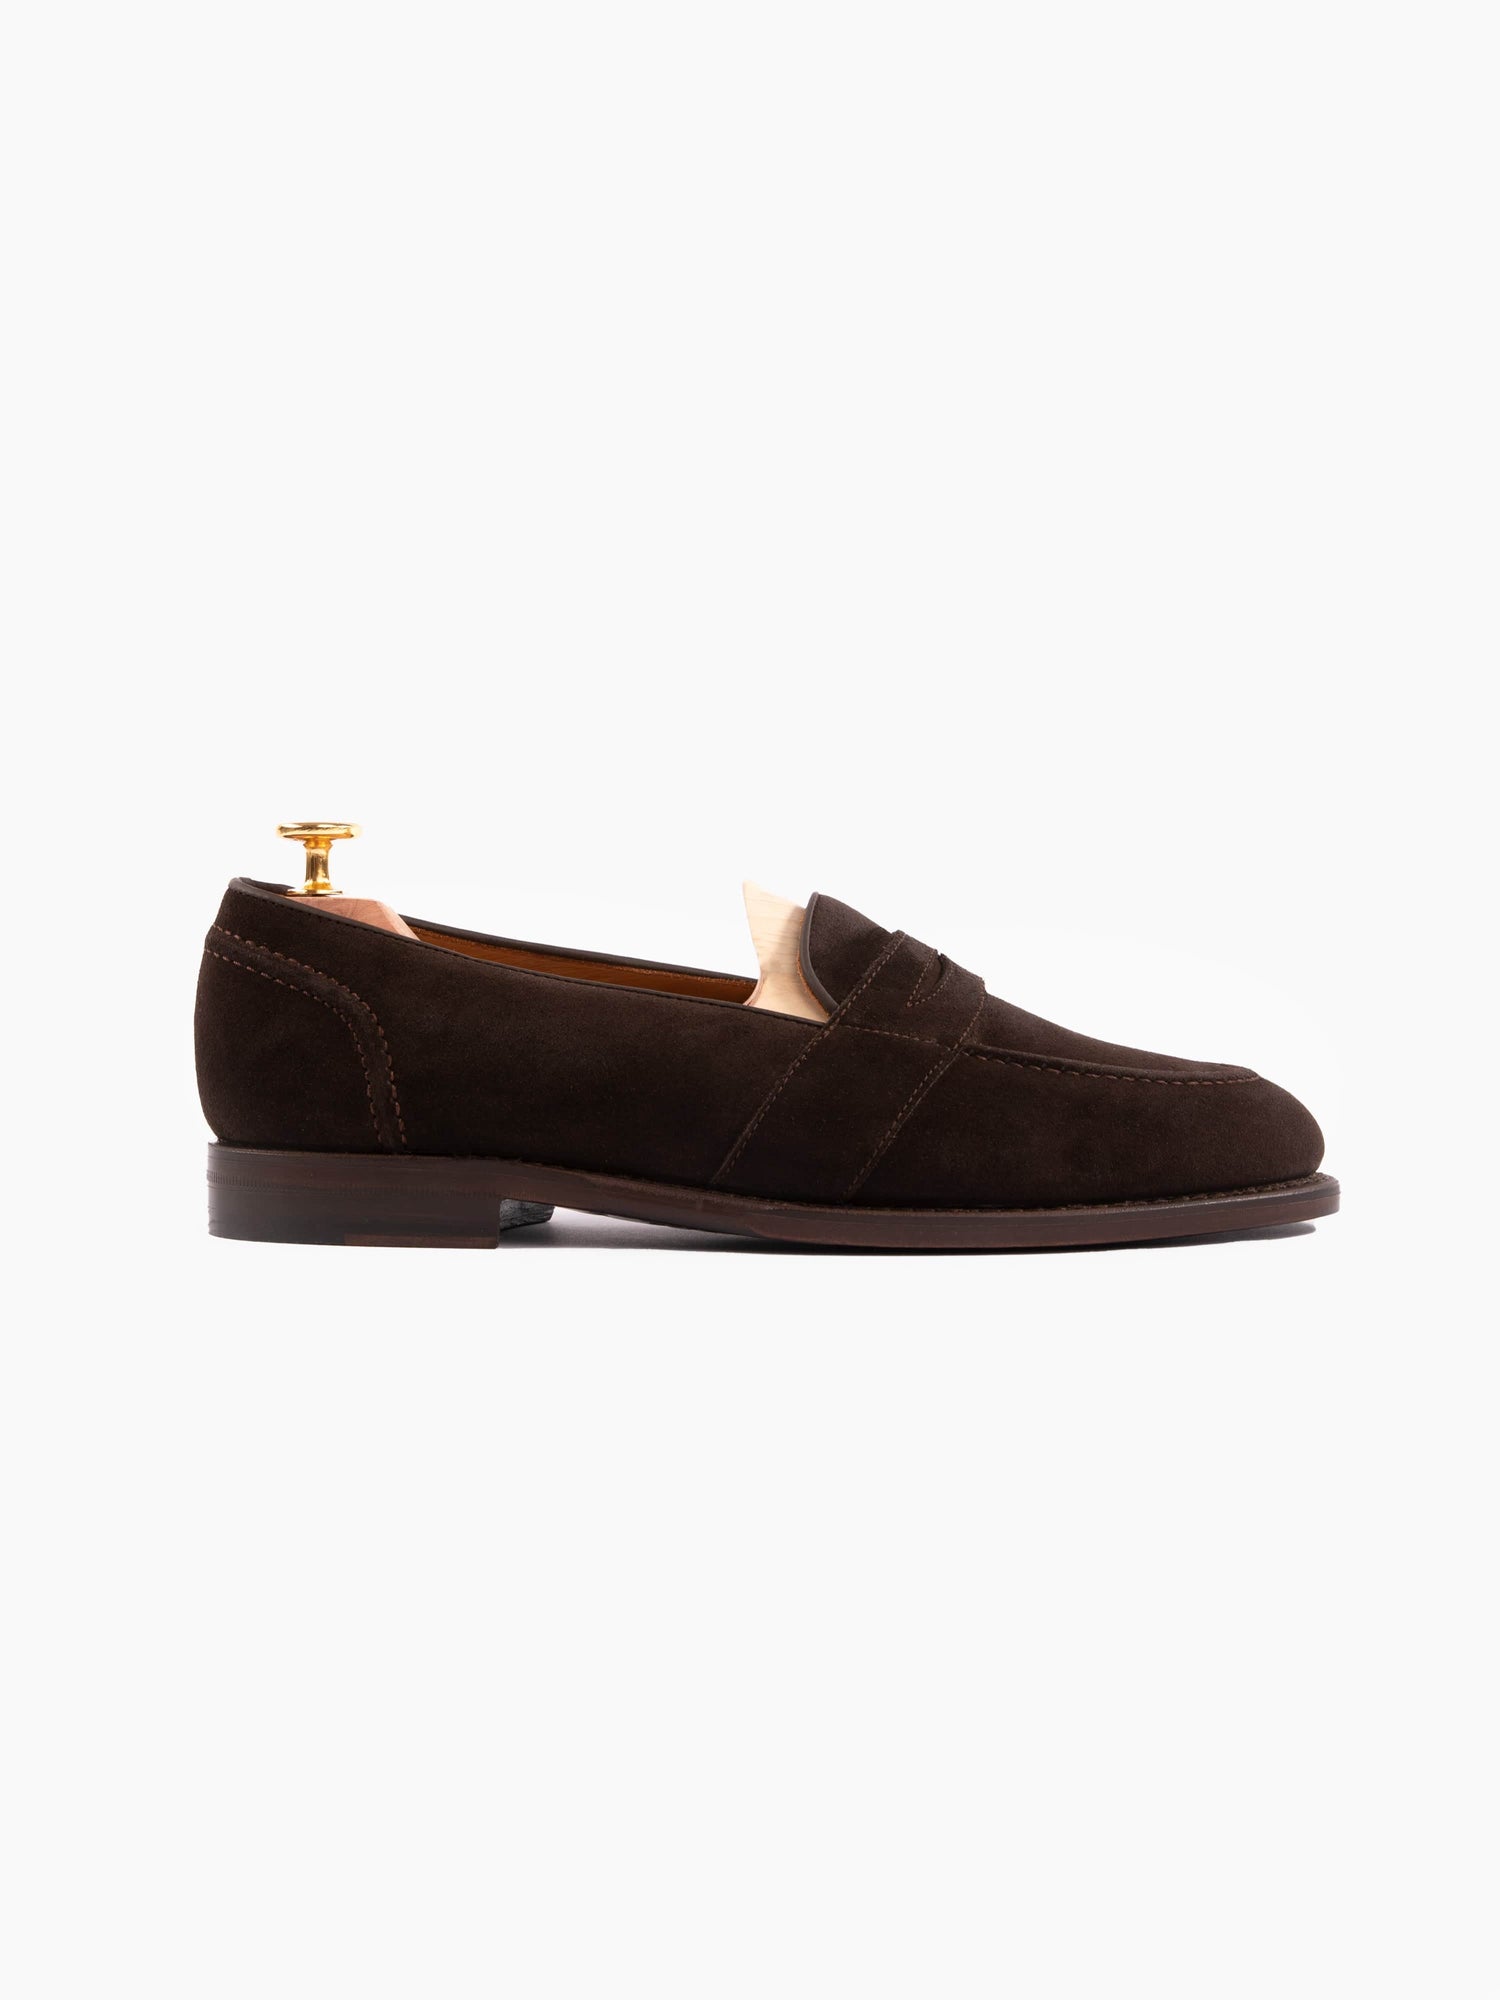 Penny Loafers Dark Brown Suede - Grand Le Mar